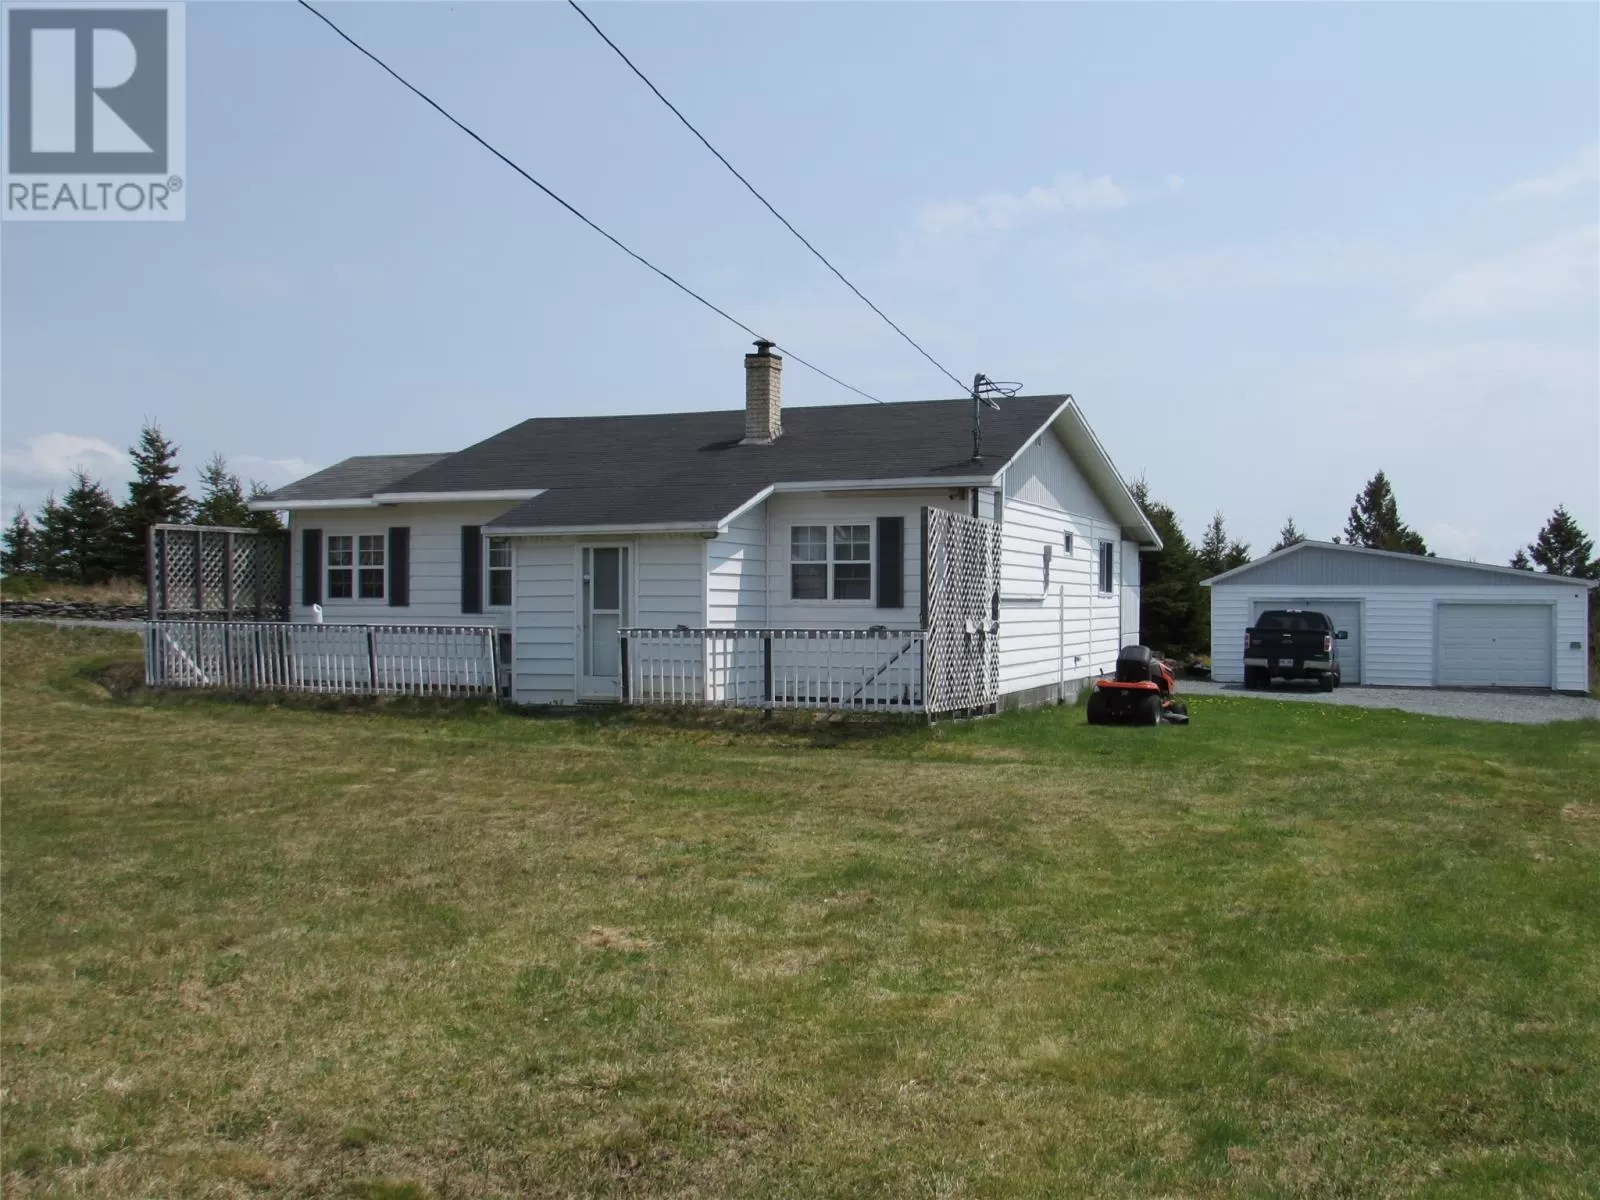 House for rent: 35 Ryan's Hill, Colliers, Newfoundland & Labrador A0A 1Y0